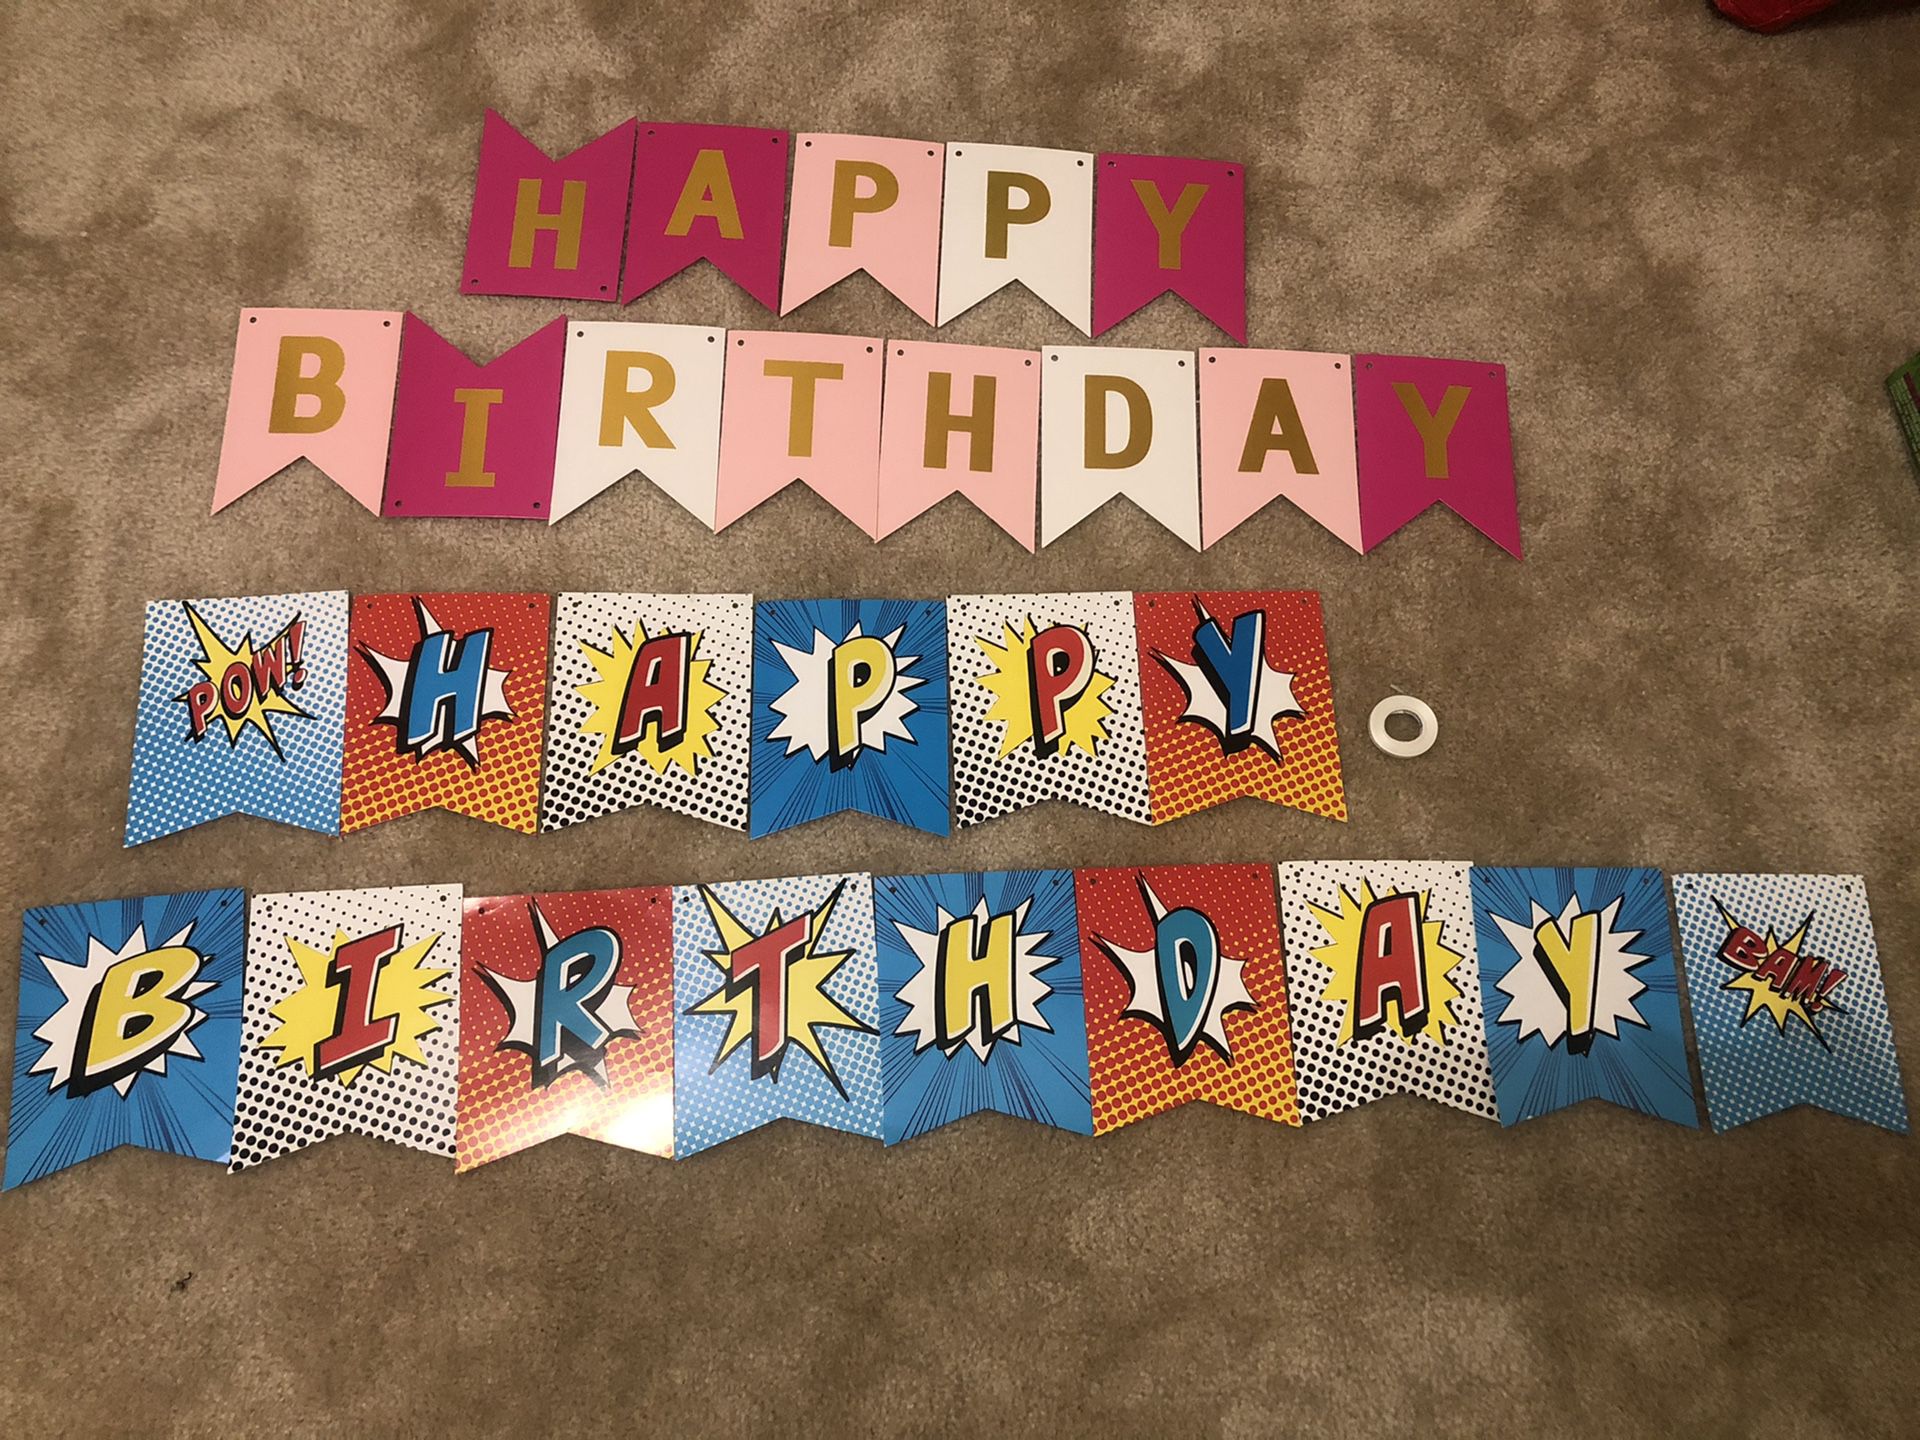 Happy birthday banner party decoration... 2 sets ribbon included